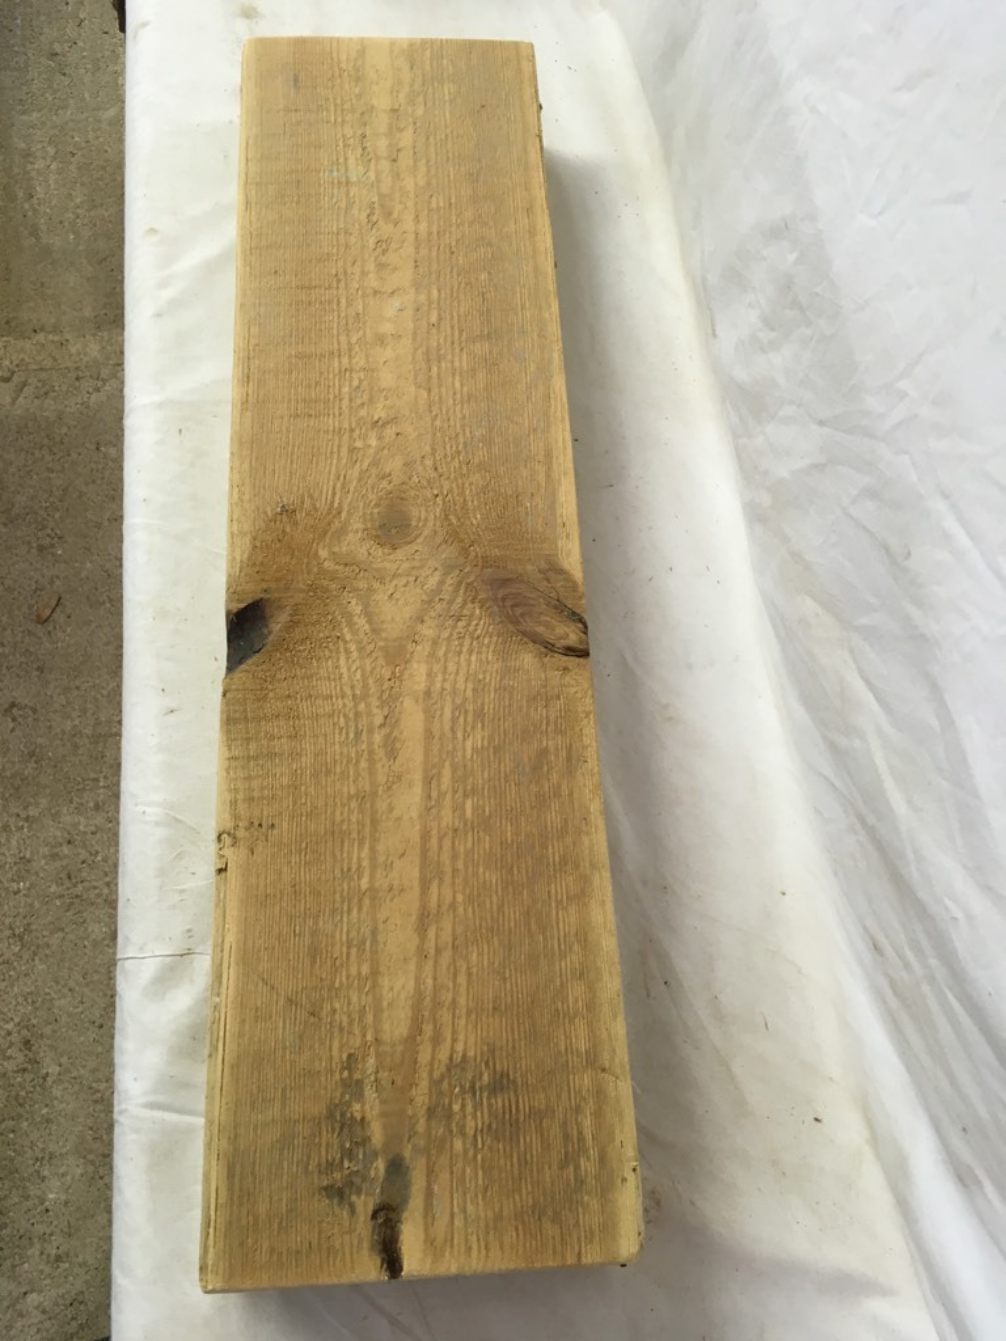 26 7/8inch Or 68.5cm Long Old Pine Timber Joist Beam Floating Over Mantle Shelf